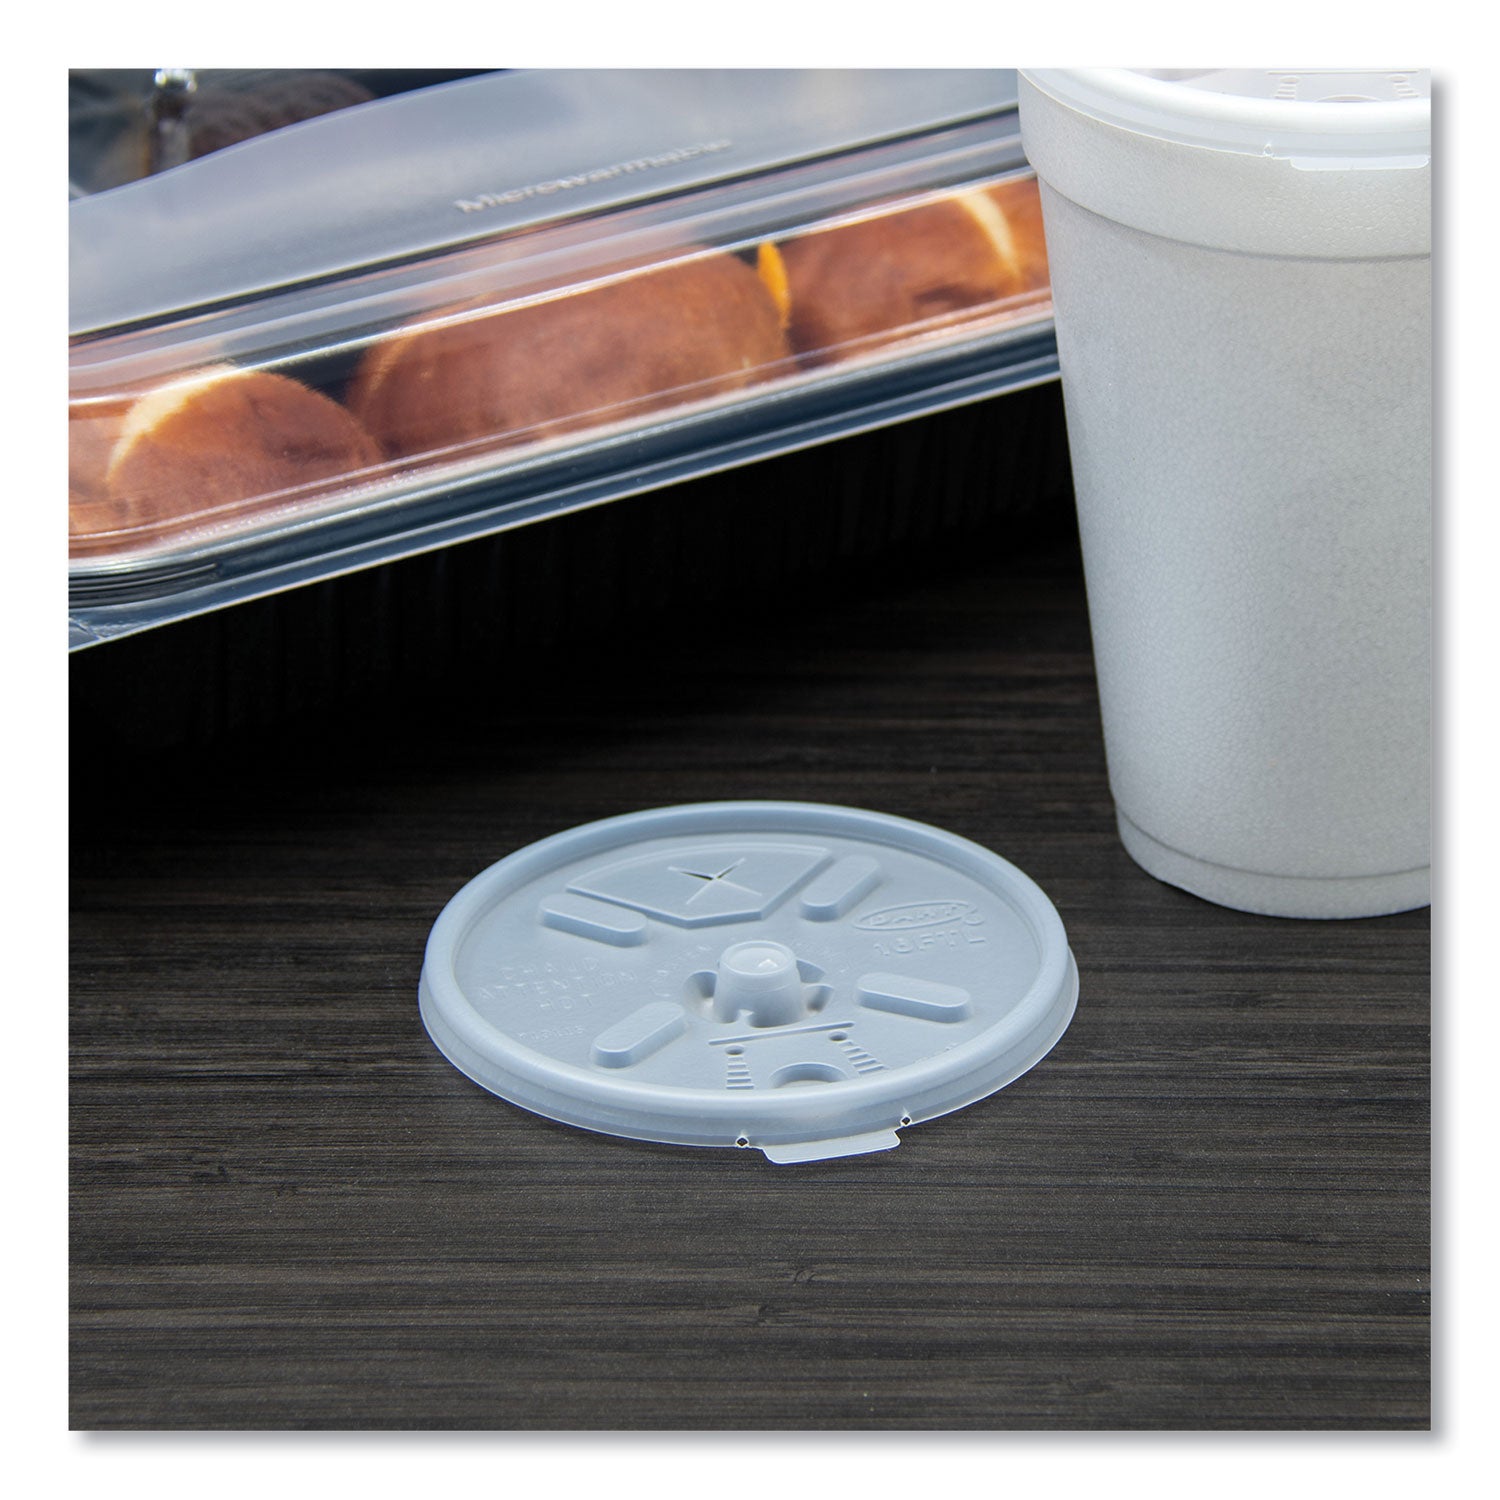 Lift n' Lock Plastic Hot Cup Lids, With Straw Slot, Fits 12 oz to 24 oz Cups, Translucent, 100/Pack, 10 Packs/Carton - 